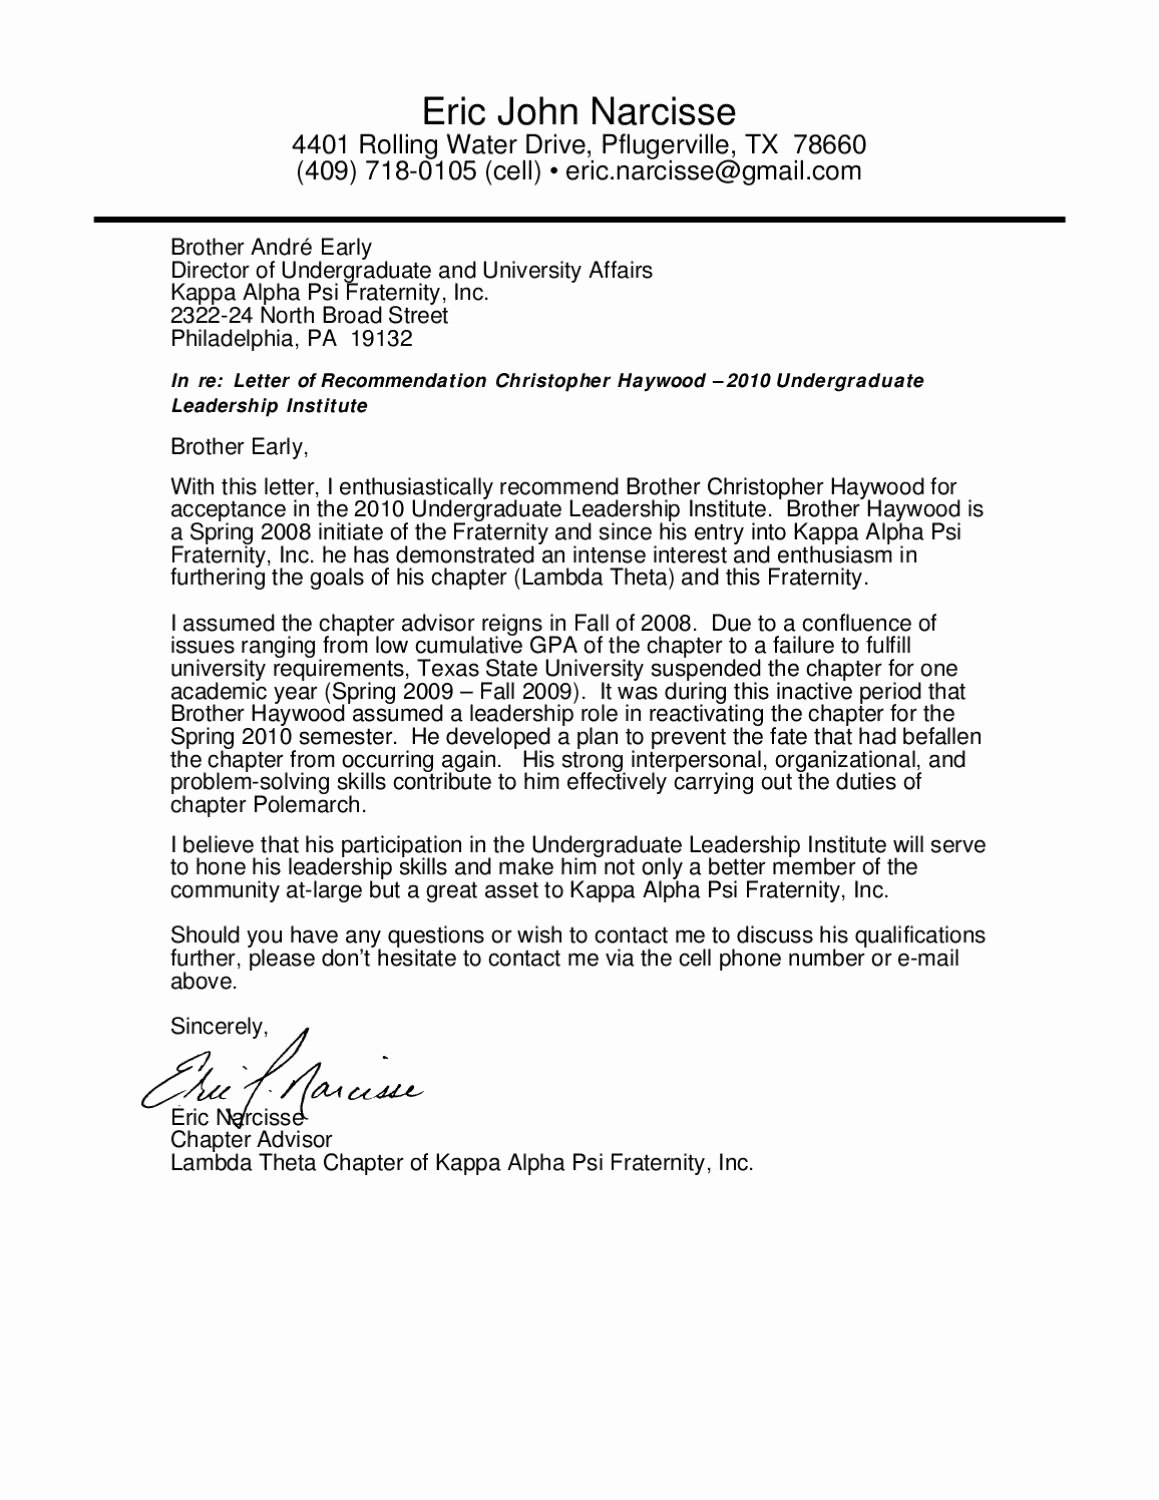 Recommendation Letter Template Sorority Recommendation Letter Template Best Of Letter Of Rec